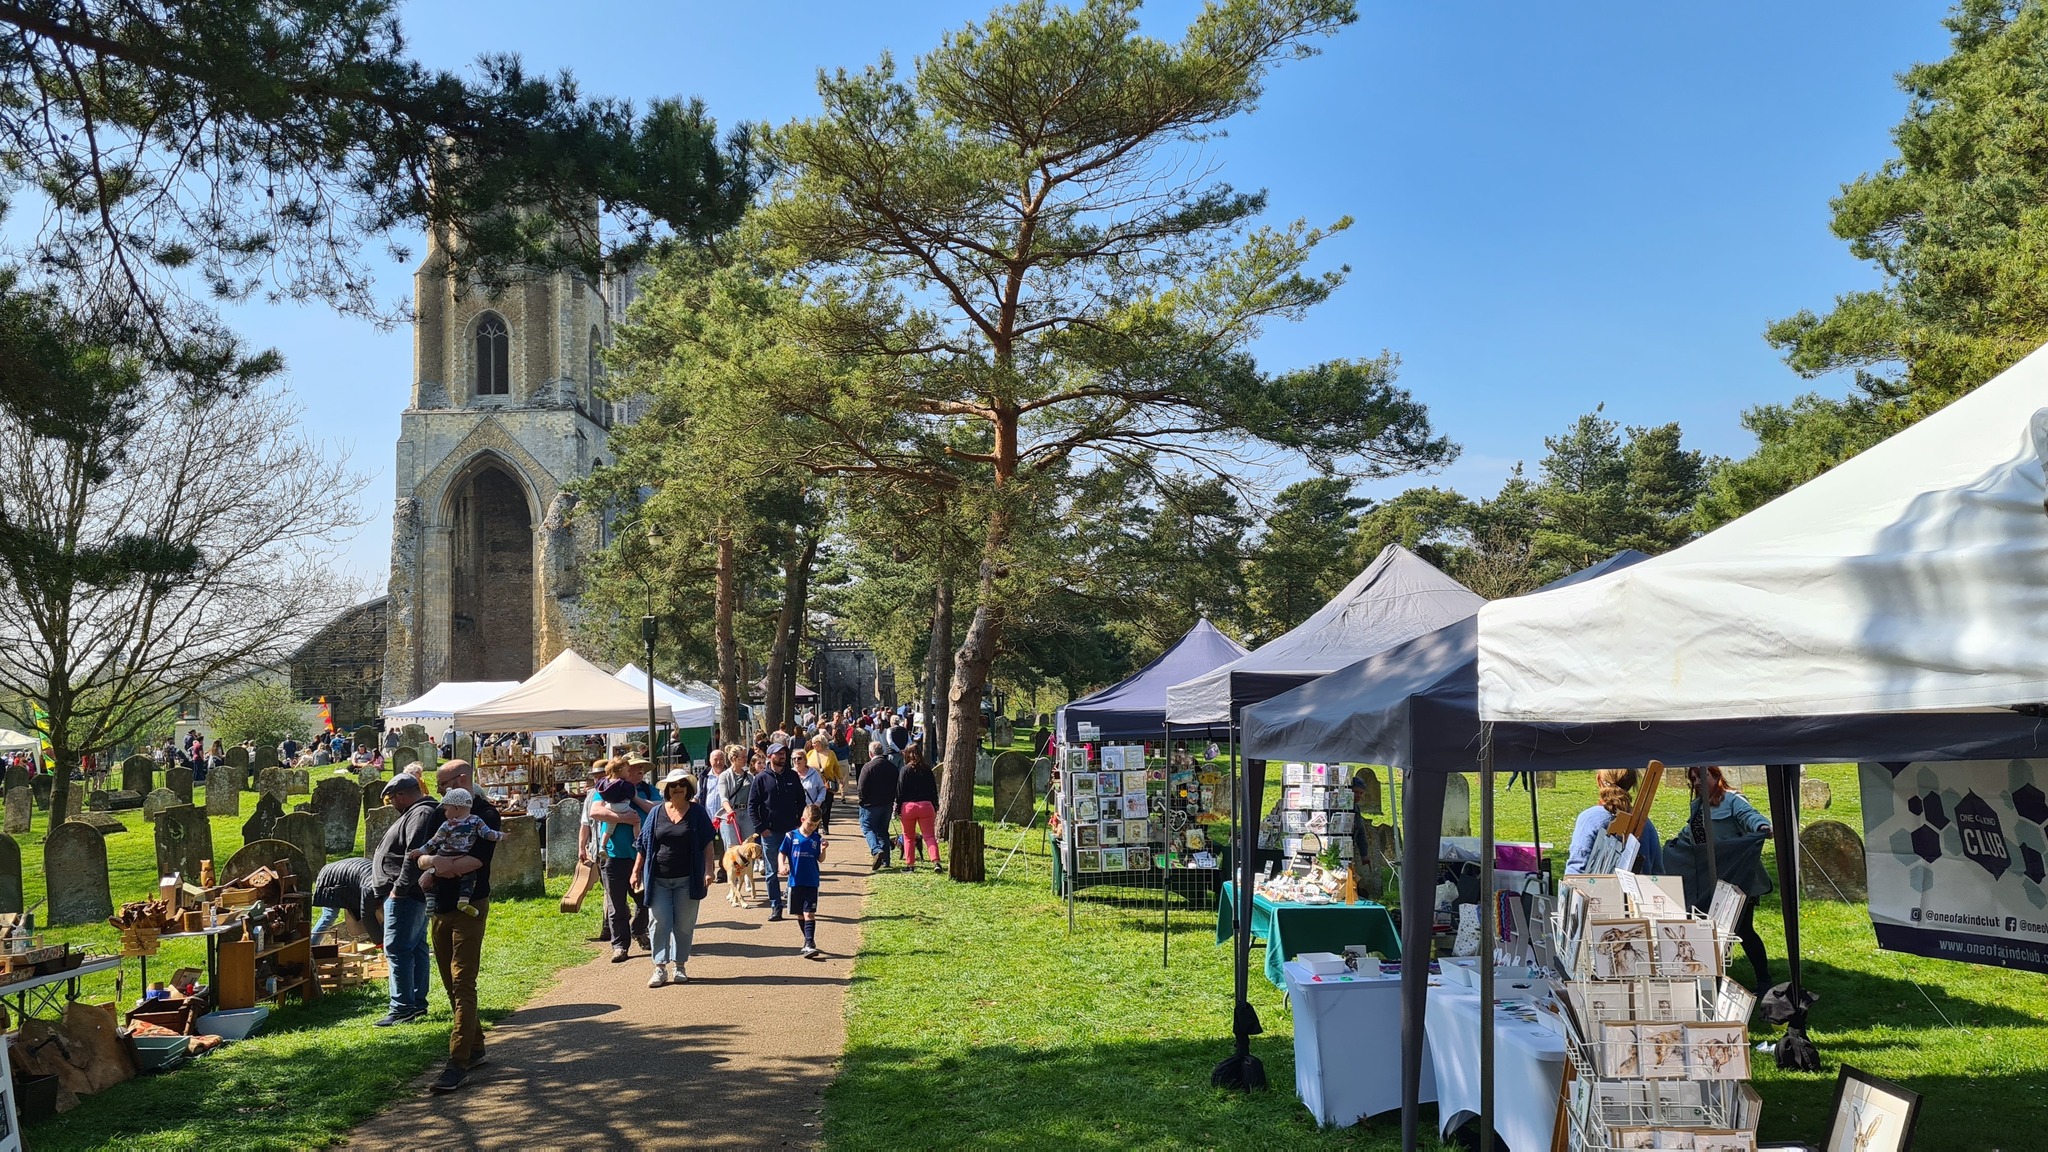 Stalls in Abbey grounds with people